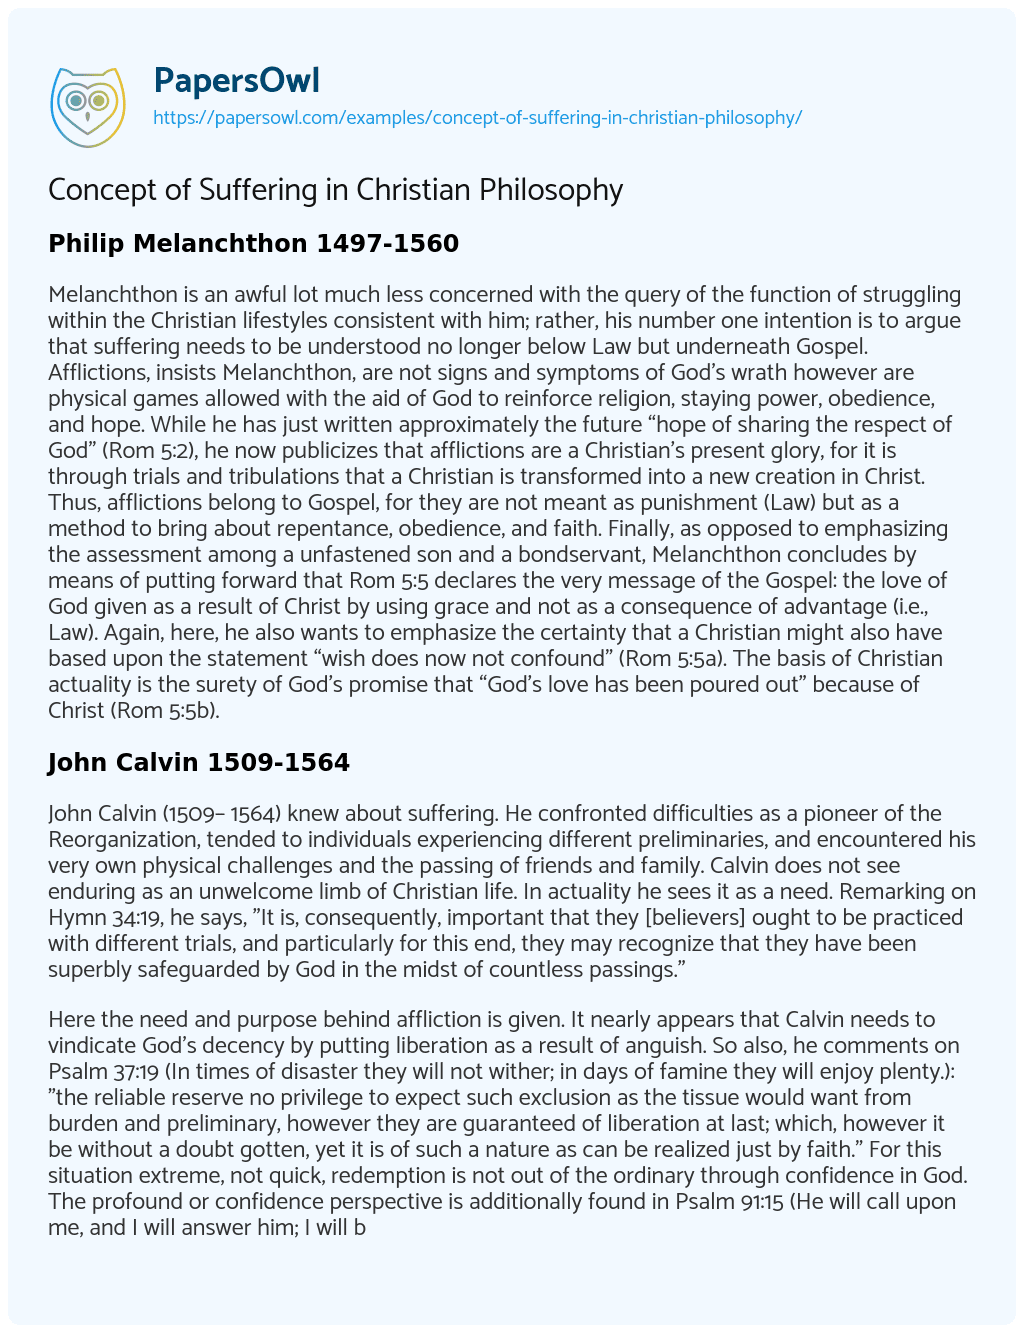 Essay on Concept of Suffering in Christian Philosophy